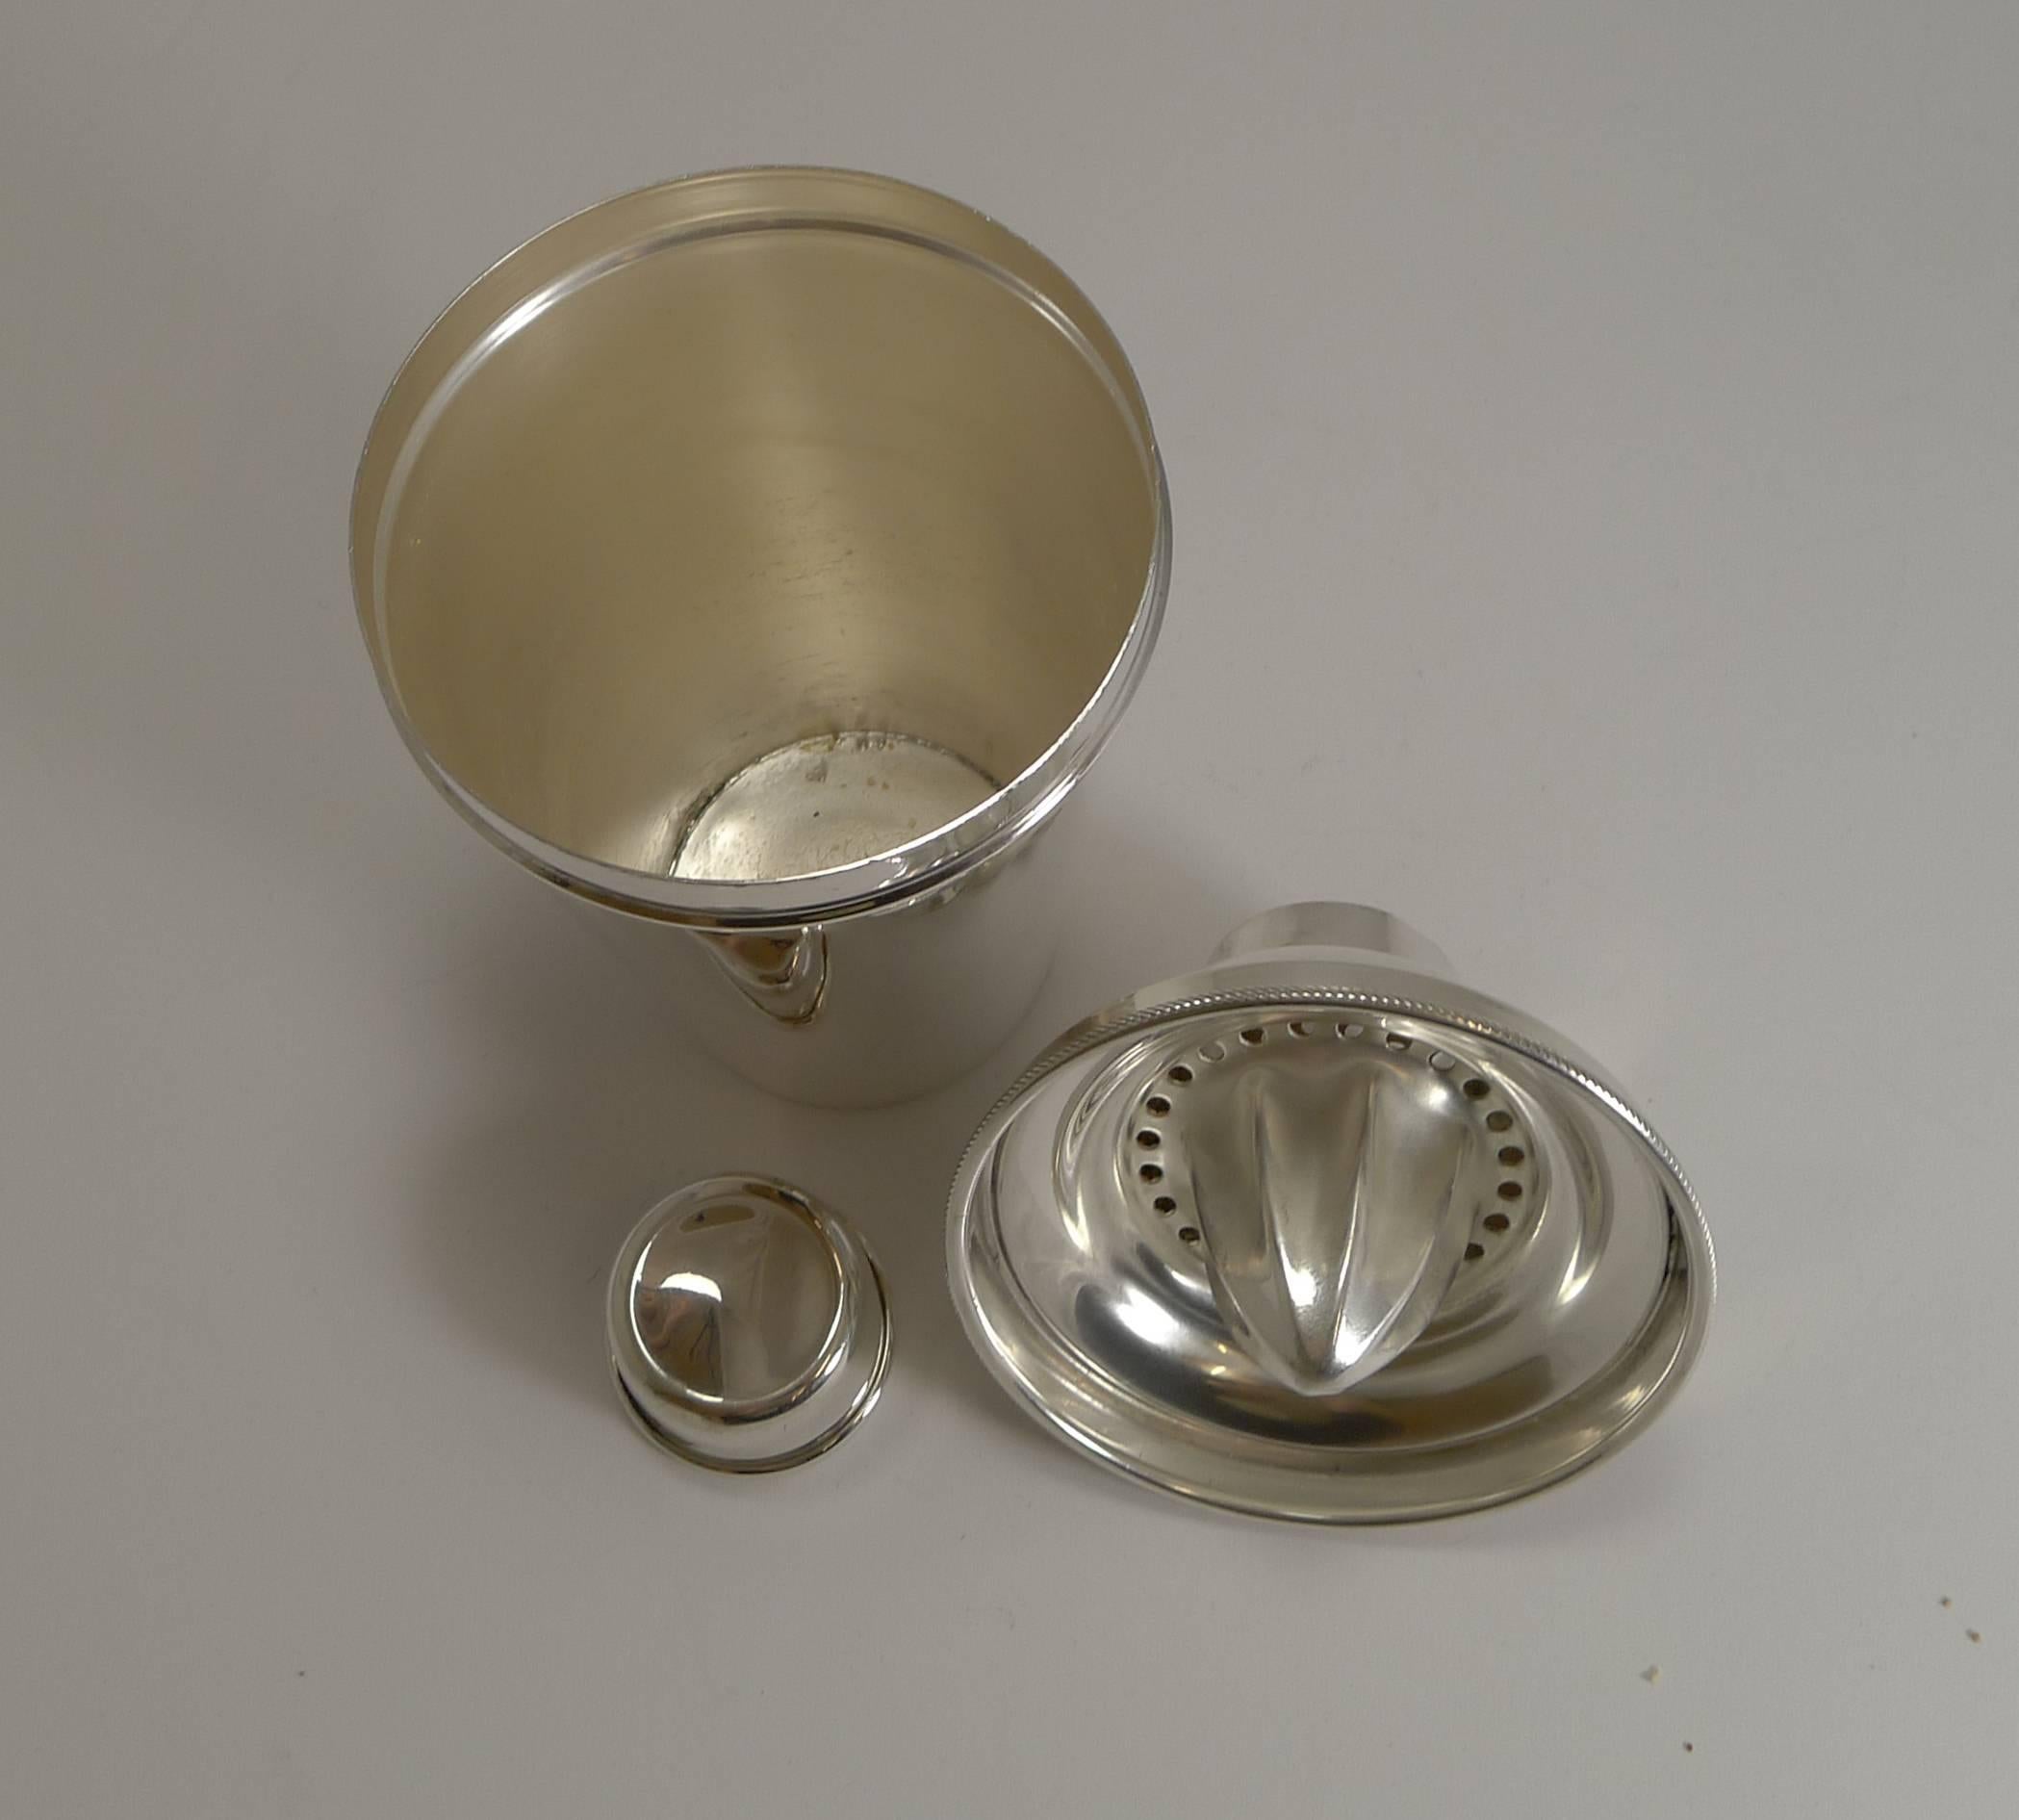 Large Vintage Silver Plated Cocktail Shaker with Integral Lemon Squeezer 2